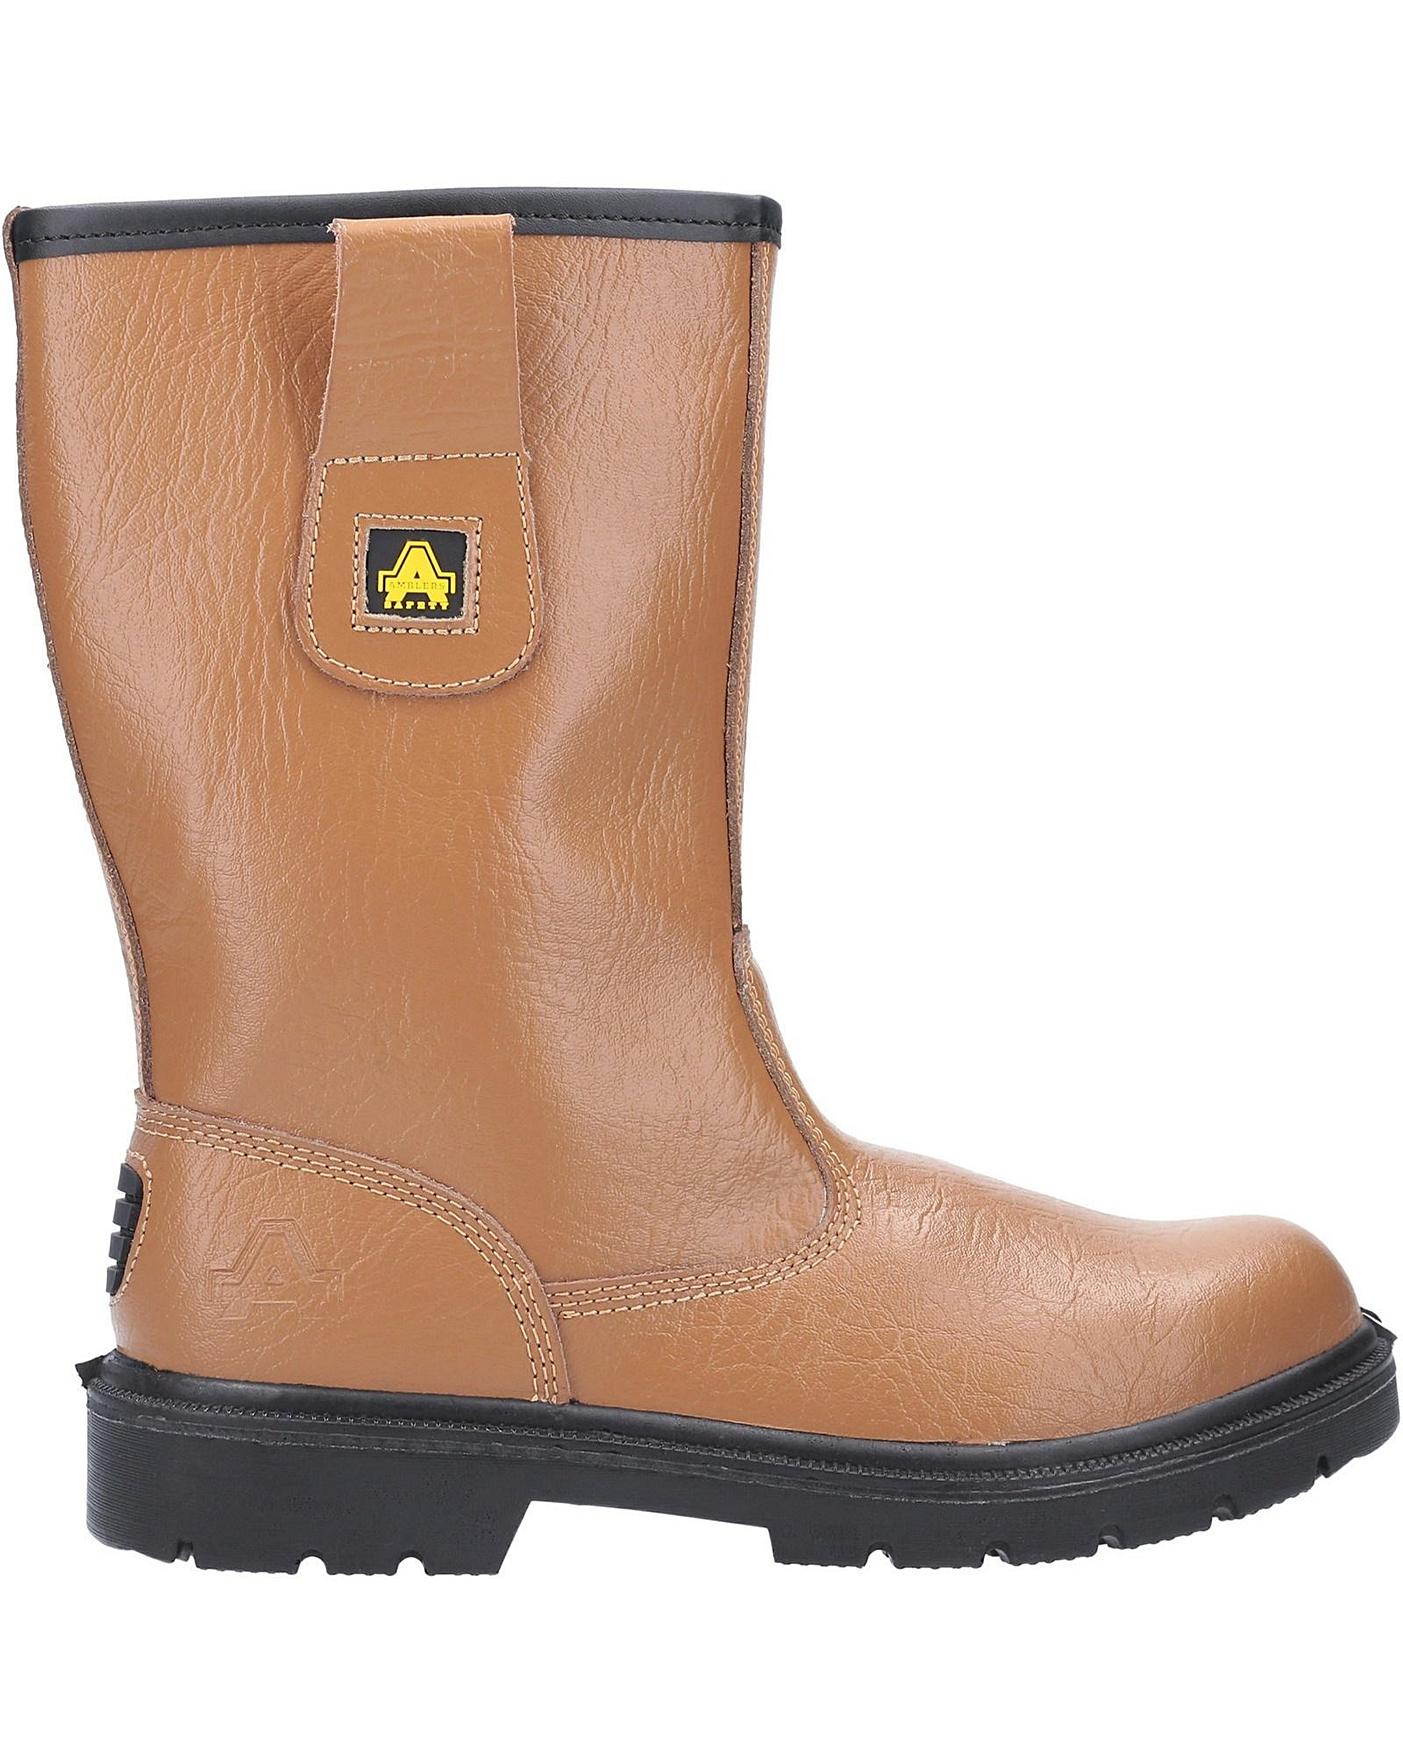 Amblers Safety FS124 Rigger Boot